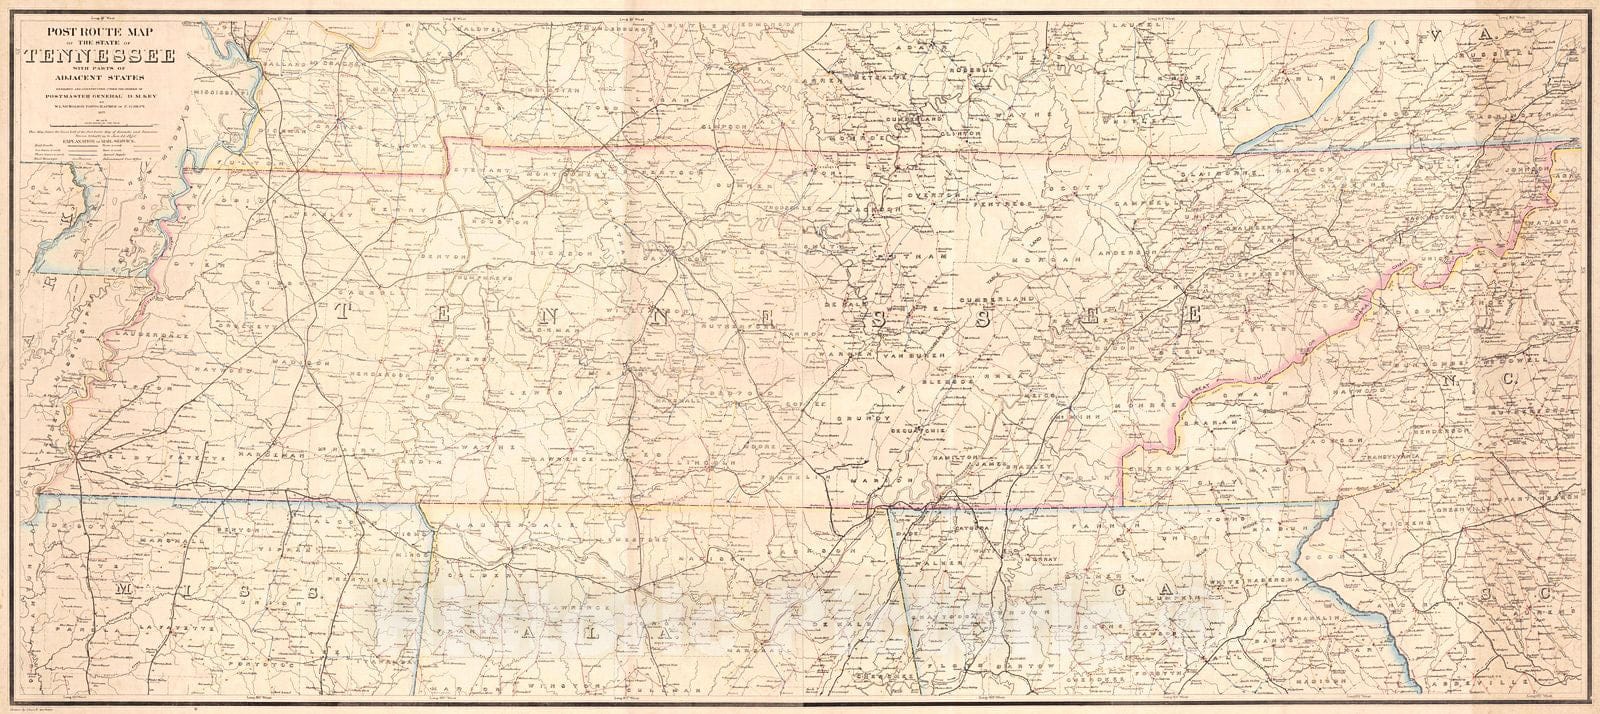 Historic Map : 1877 Postal Route Map of the State of Tennessee : Vintage Wall Art